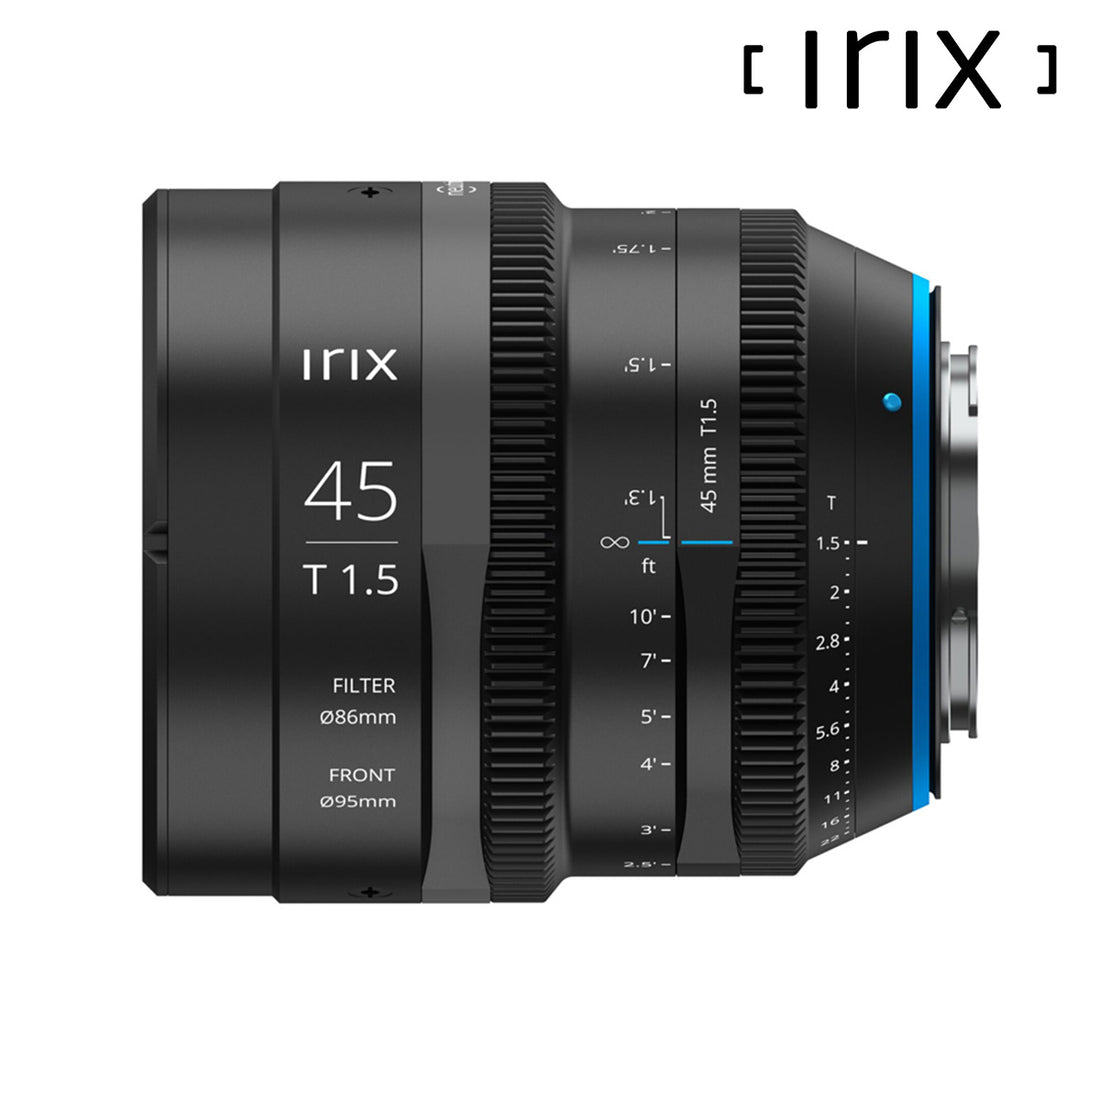 Irix 45mm T1.5 Manual Focus PRO Cinema Lens for Canon RF Cameras with Metric Markings